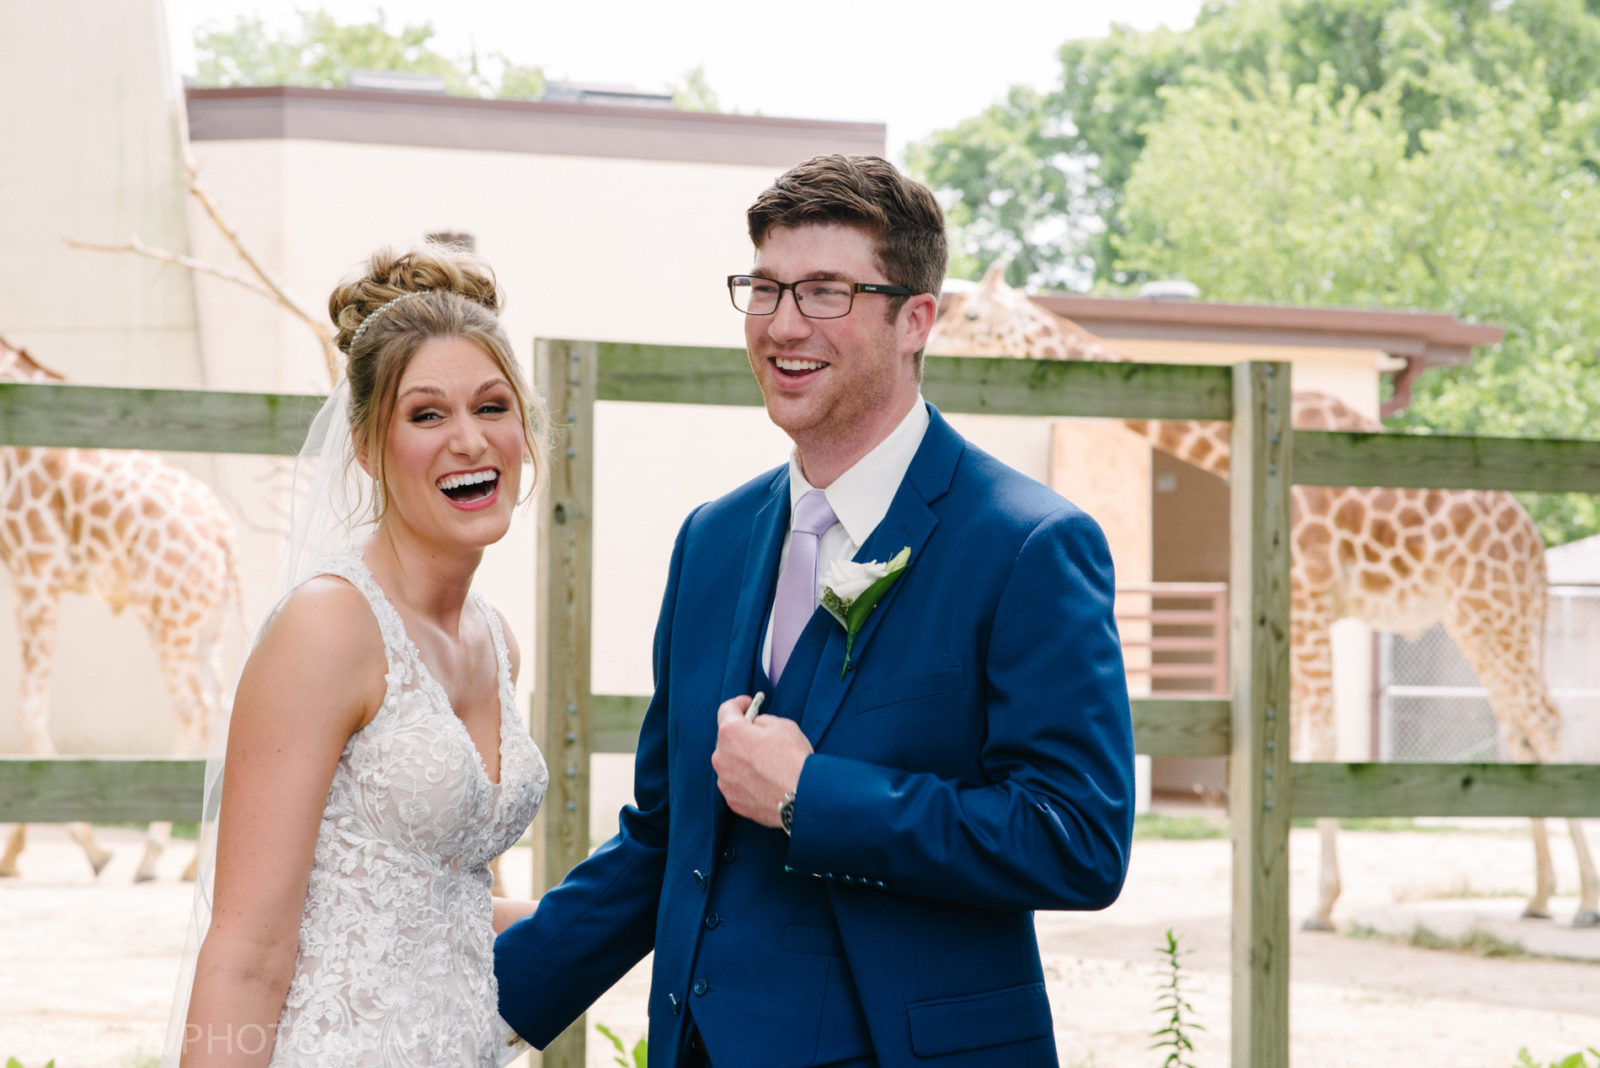 bride and groom at henry vilas zoo with giraffes